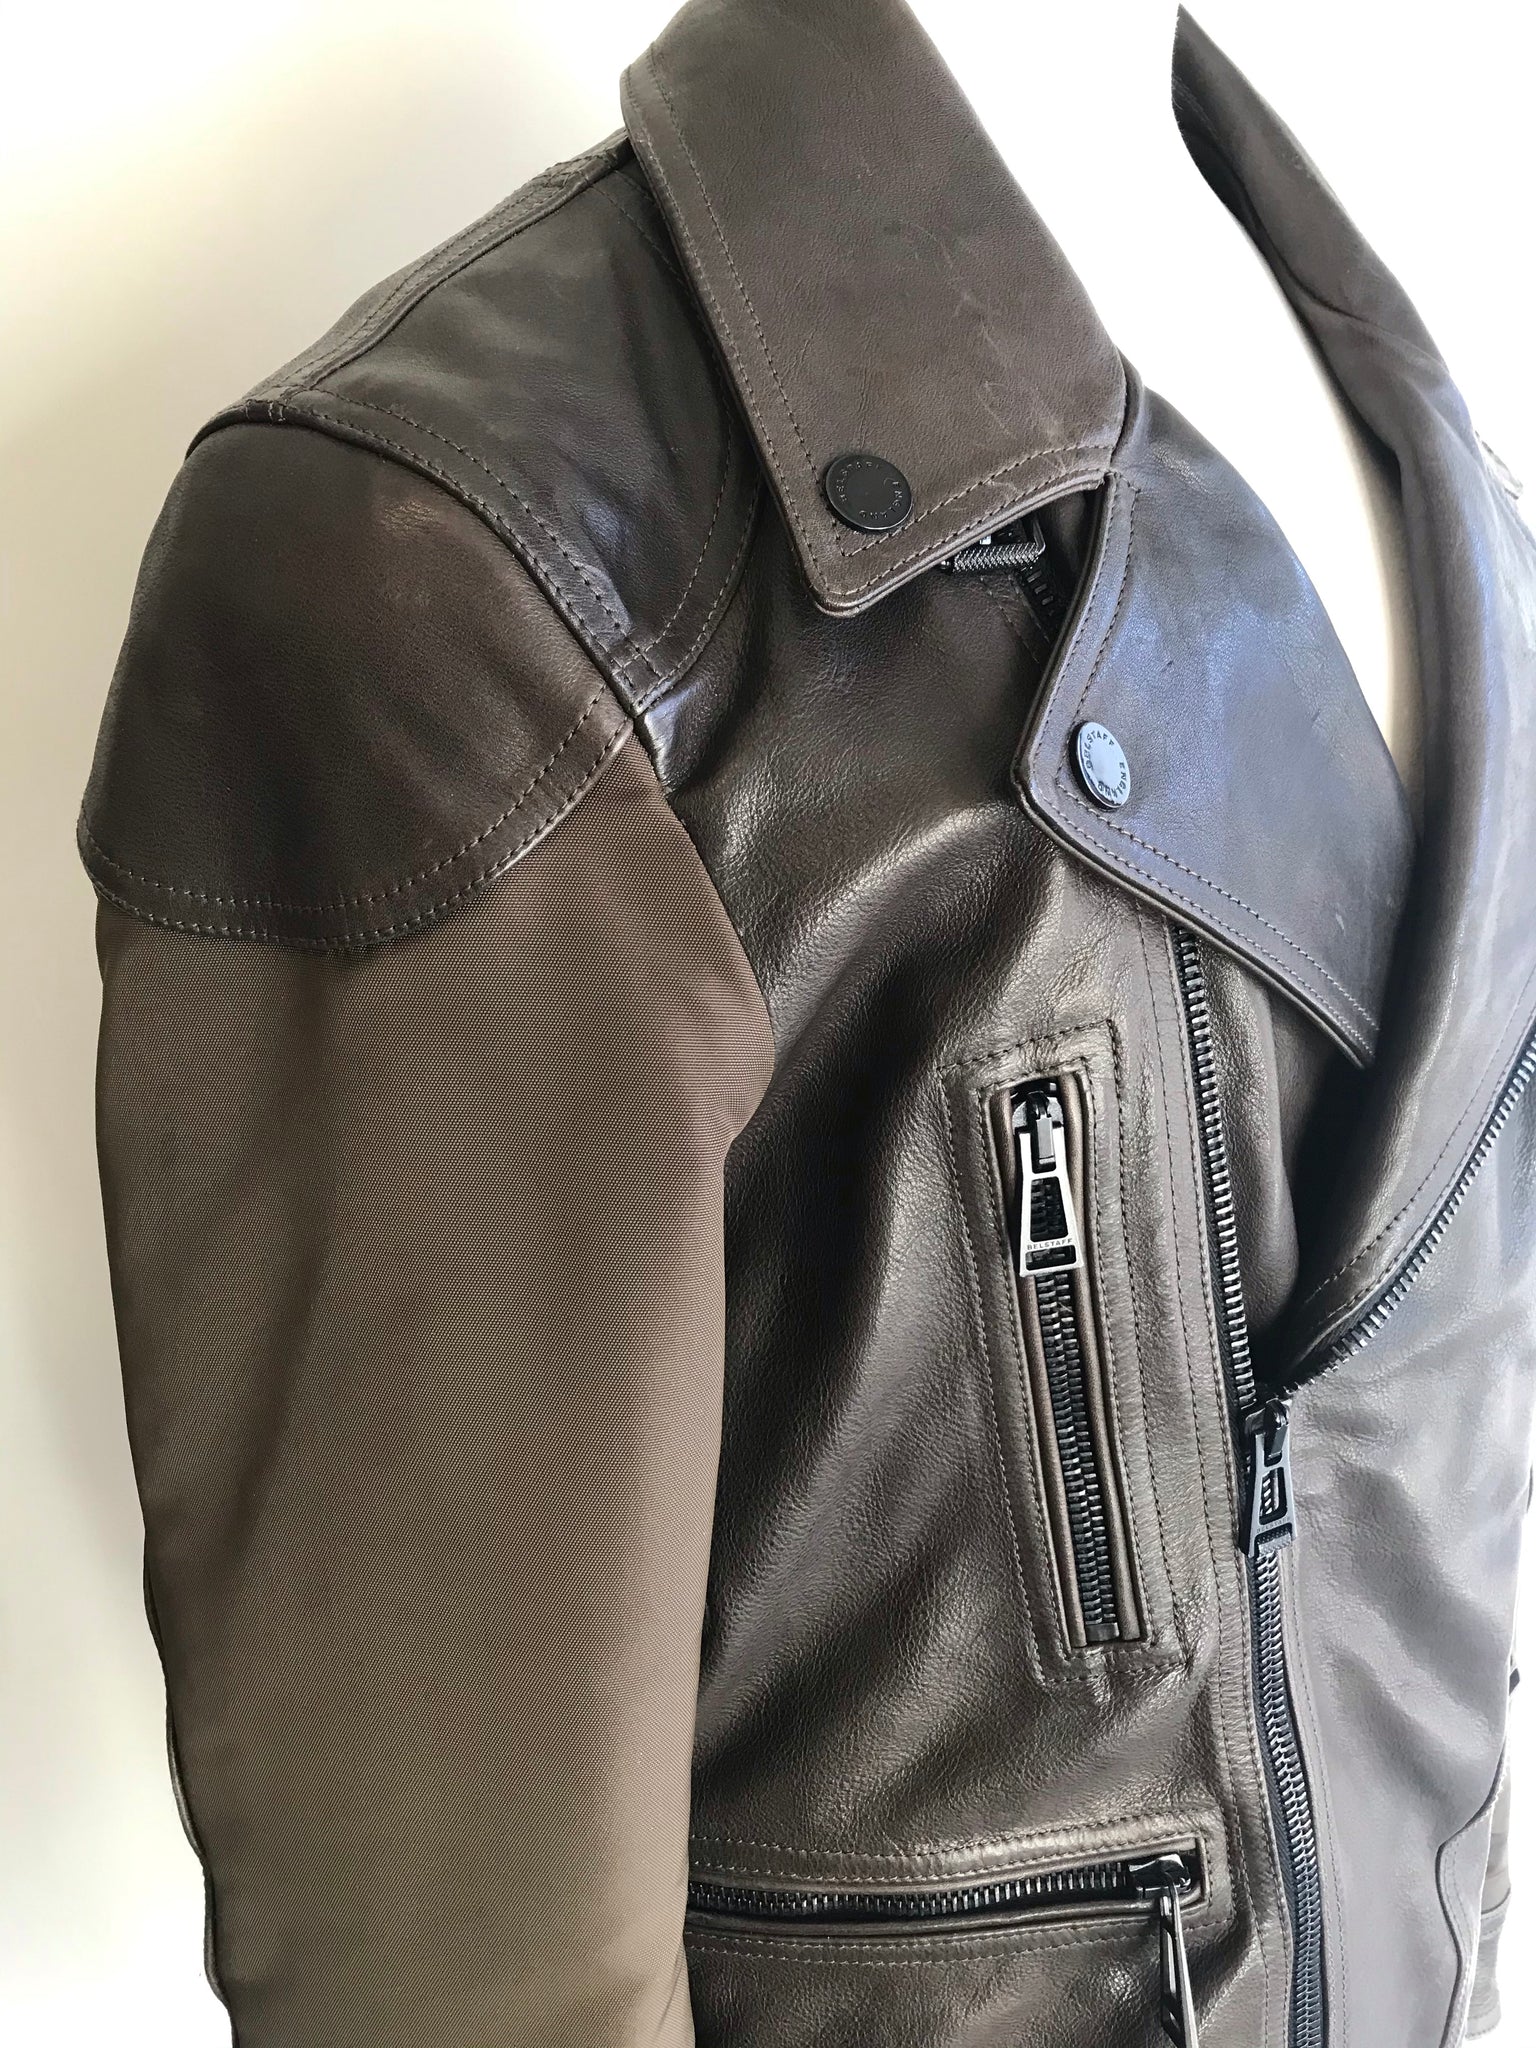 Isabella's Wardrobe Belstaff Gents Brown Leather and Canvas Jacket.